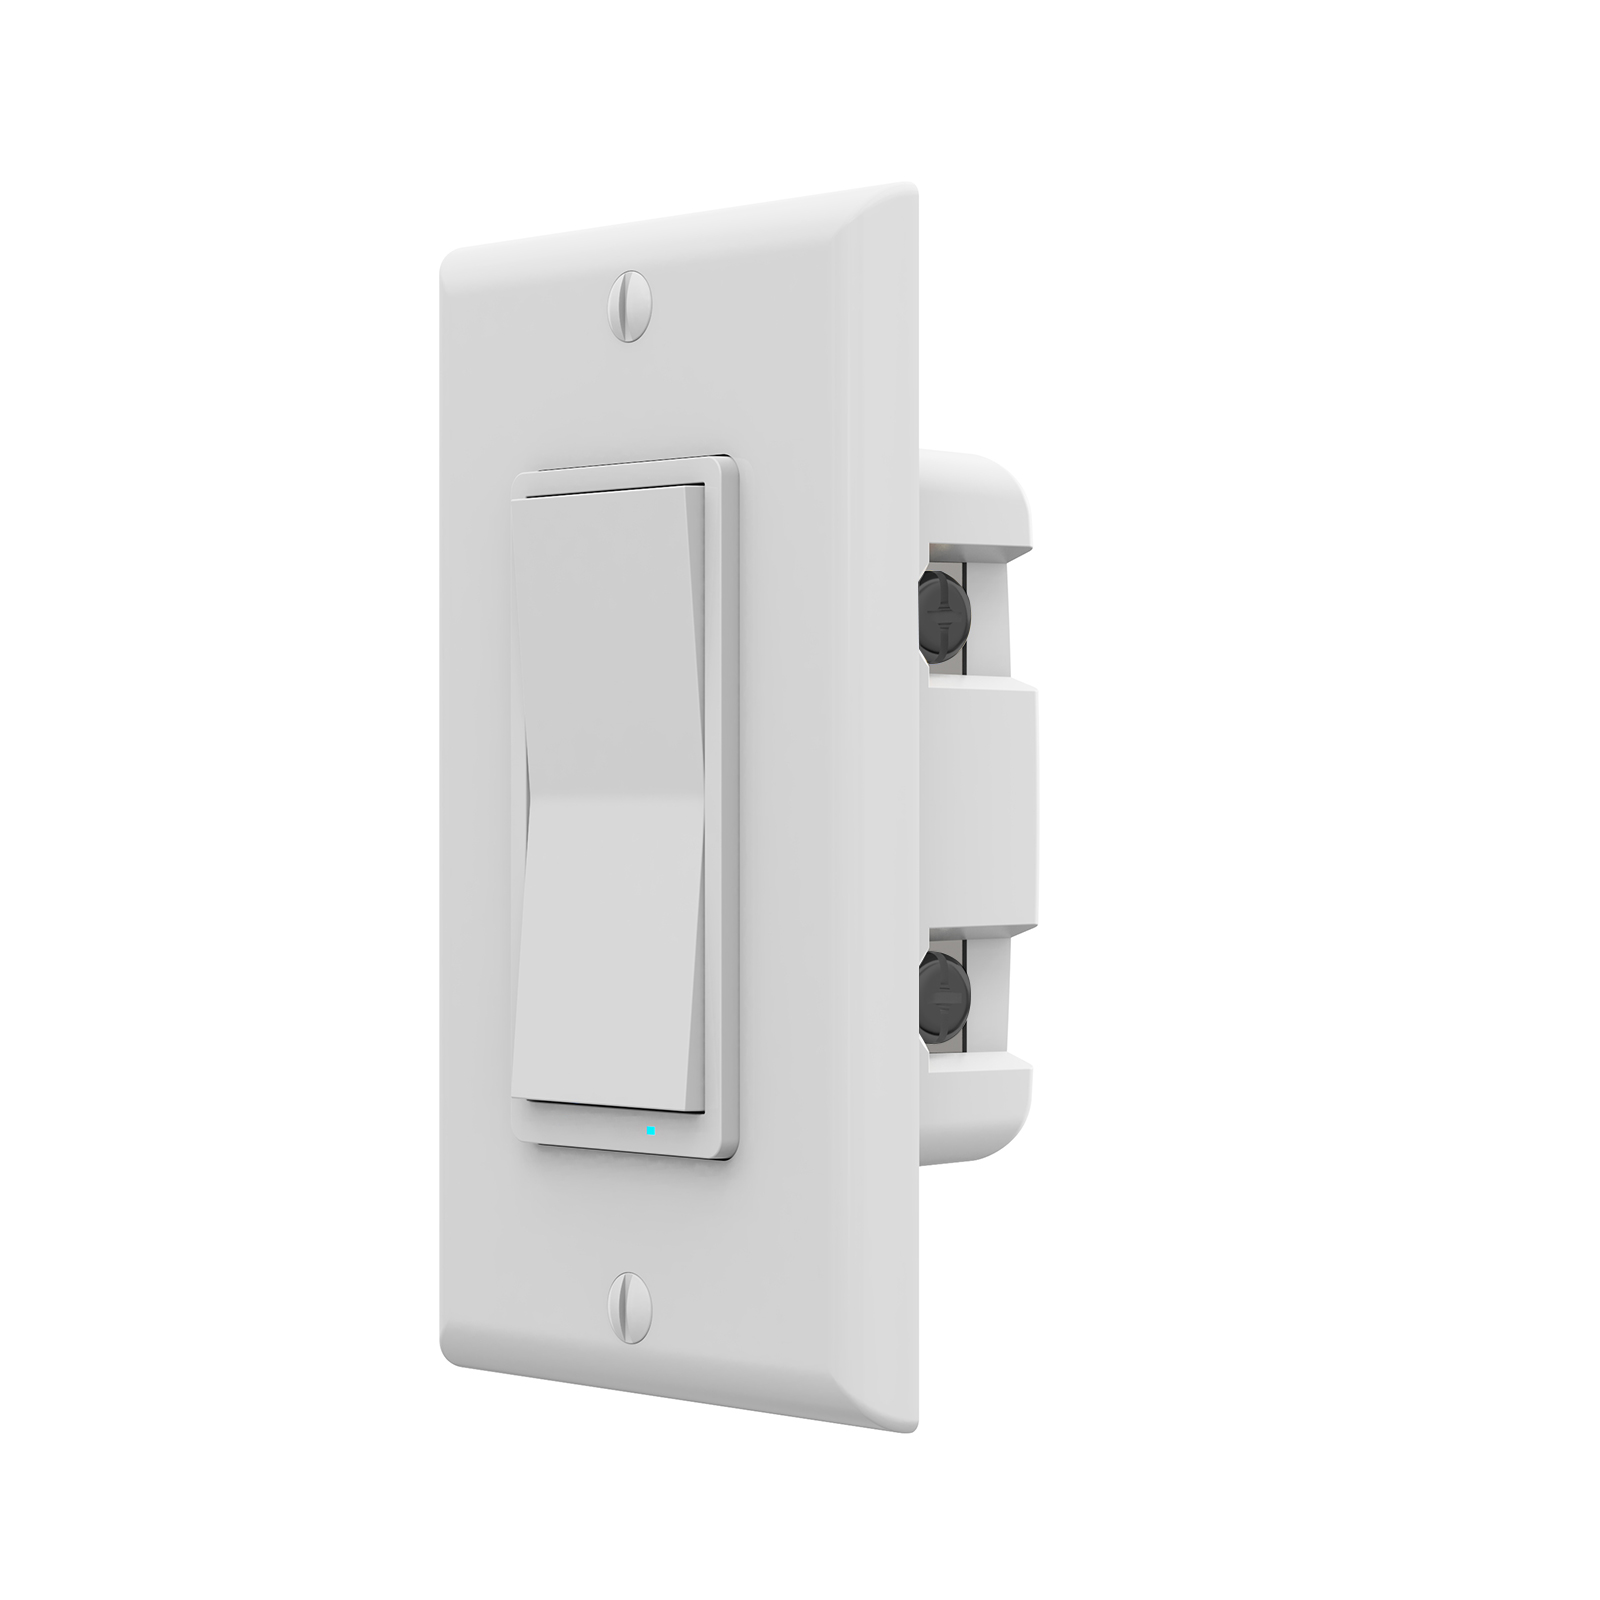 Minoston Wi-Fi Dual Smart Plug for Outdoor and Indoor (MP24W)